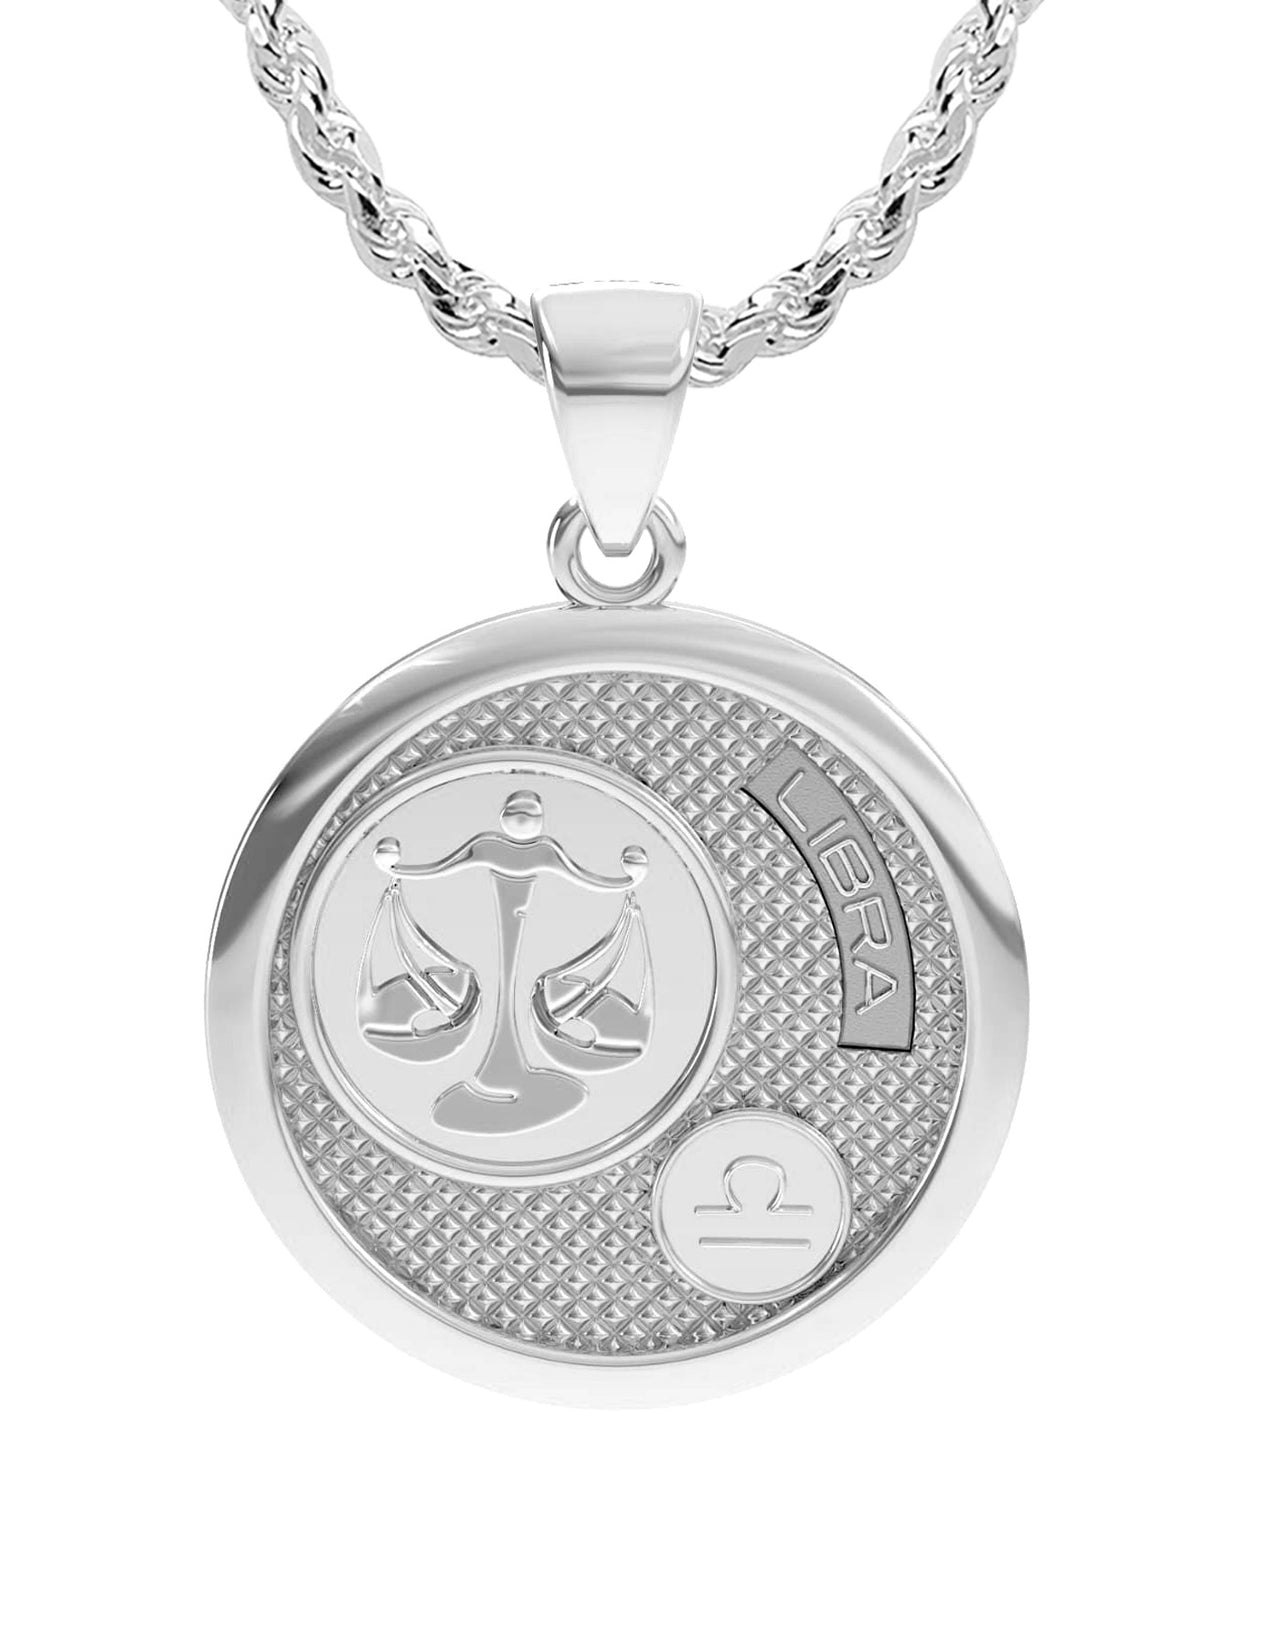 Ladies 925 Sterling Silver Round Libra Zodiac Polished Finish Pendant Necklace, 25mm